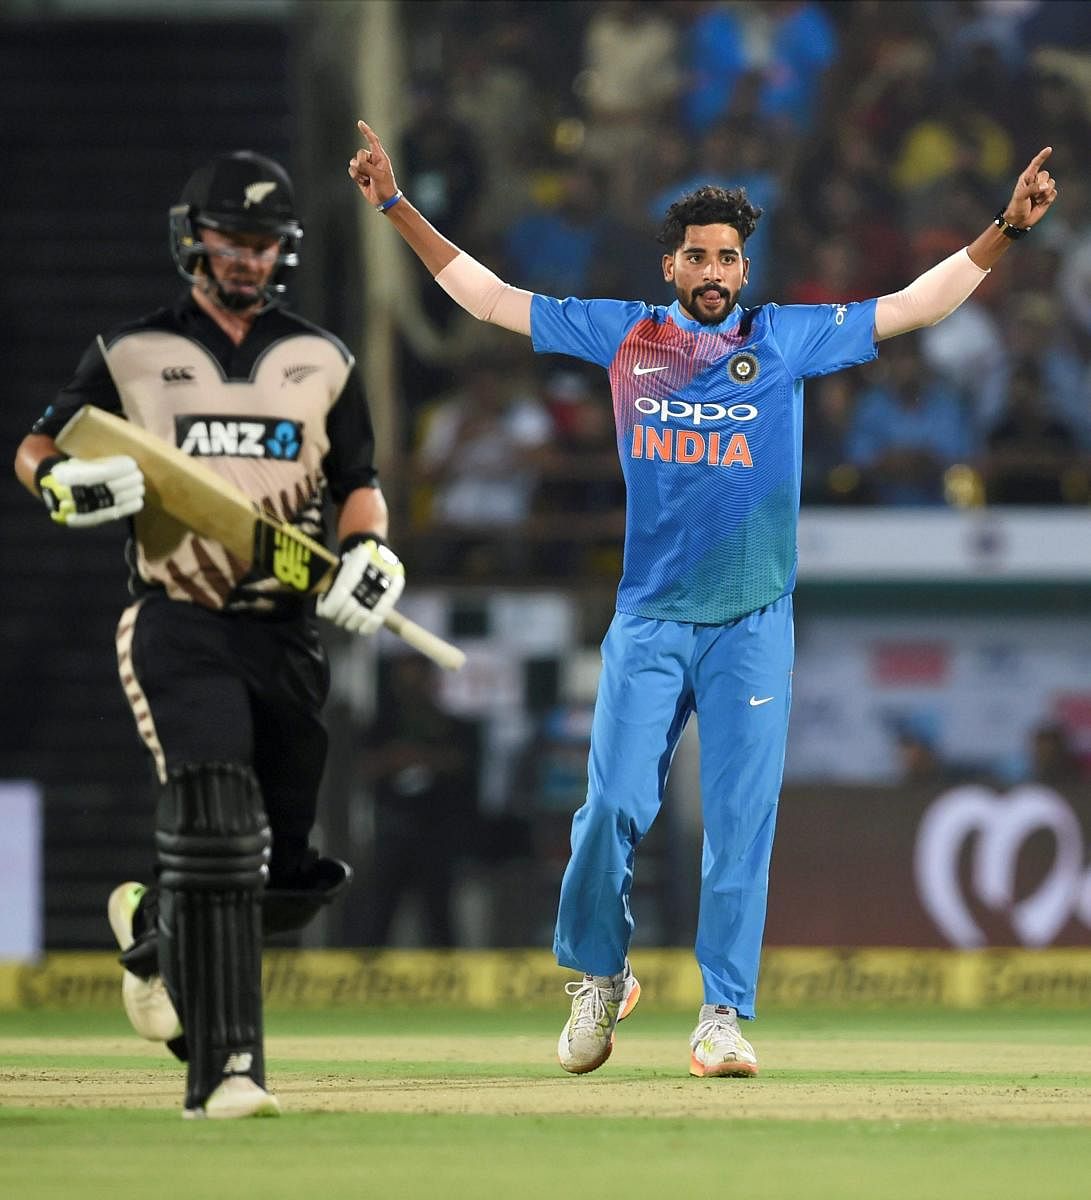 Indian cricketer Mohammed Siraj celebrates the wicket of New Zealand batsman Kane Williamson during the second T20 match in Rajkot on Saturday. PTI Photo